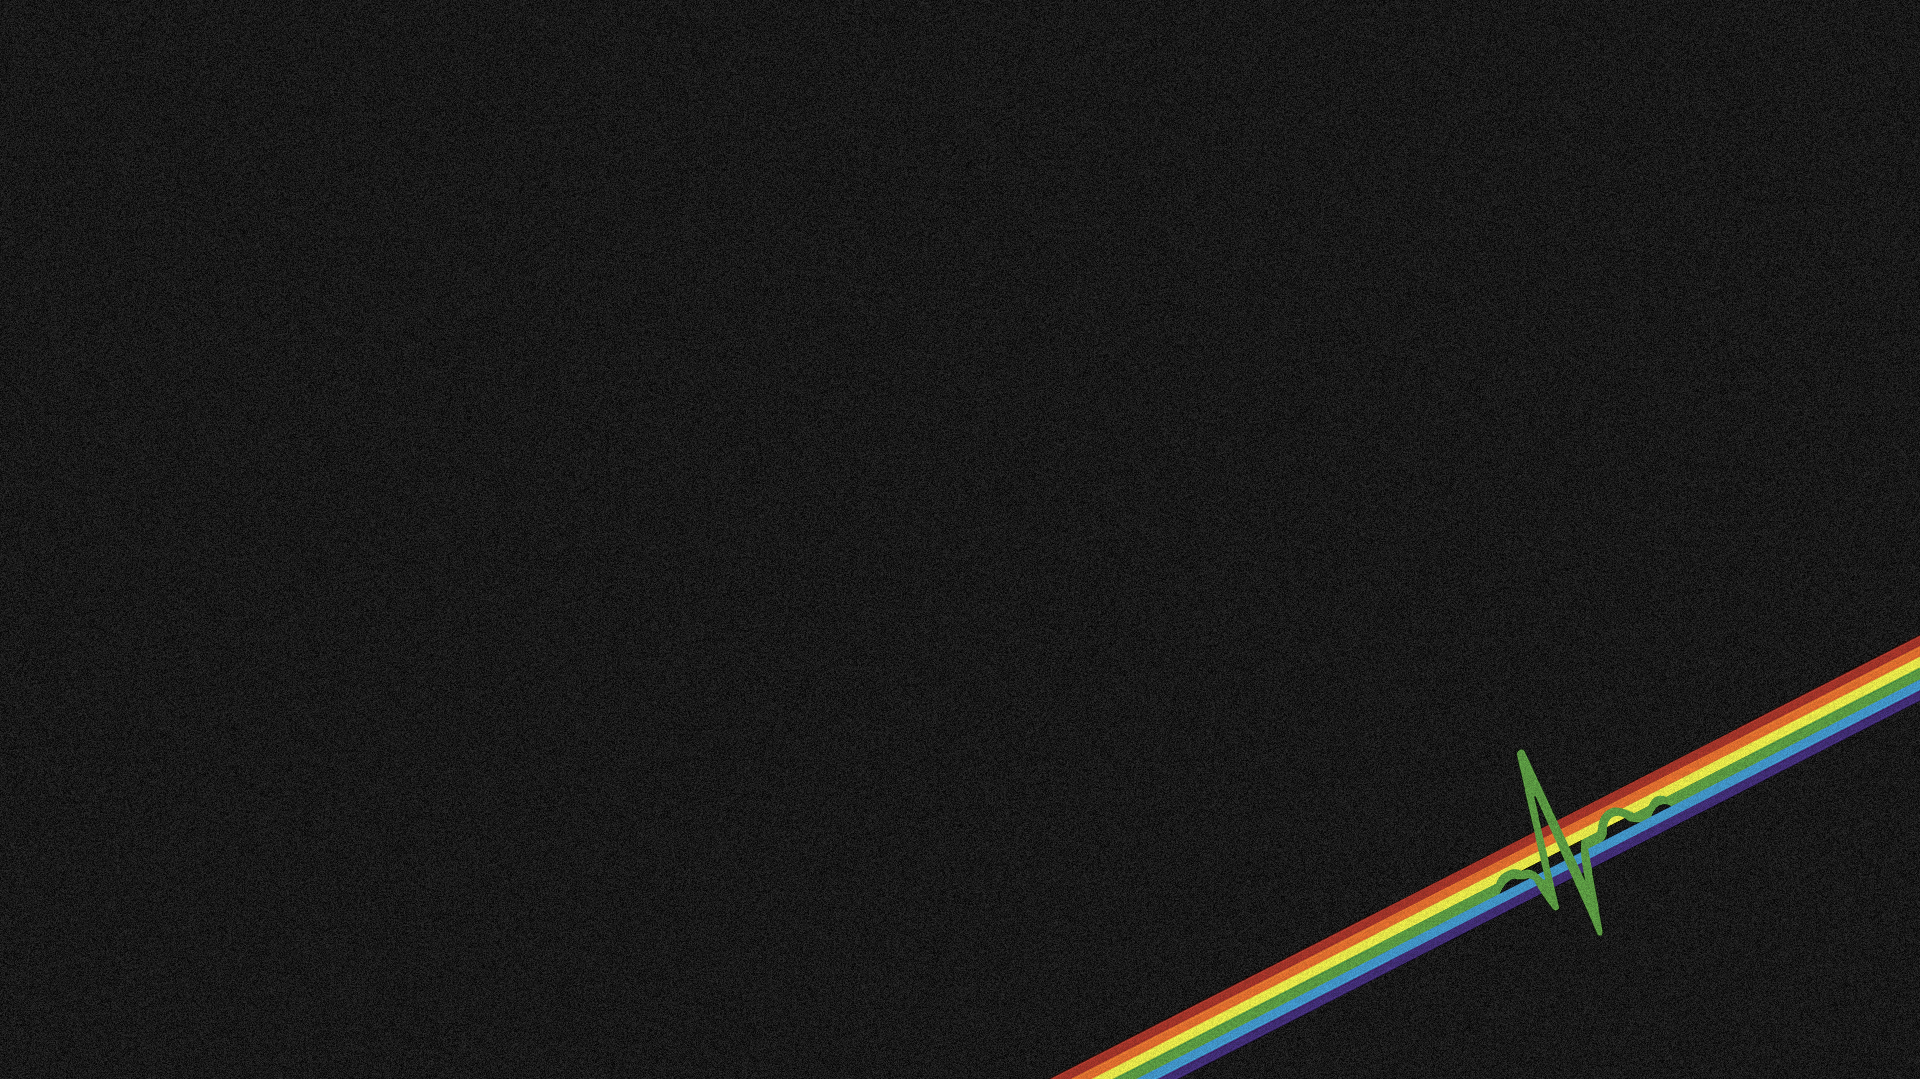 I Made This Minimalist Dark Side Of The Moon Wallpaper Thought